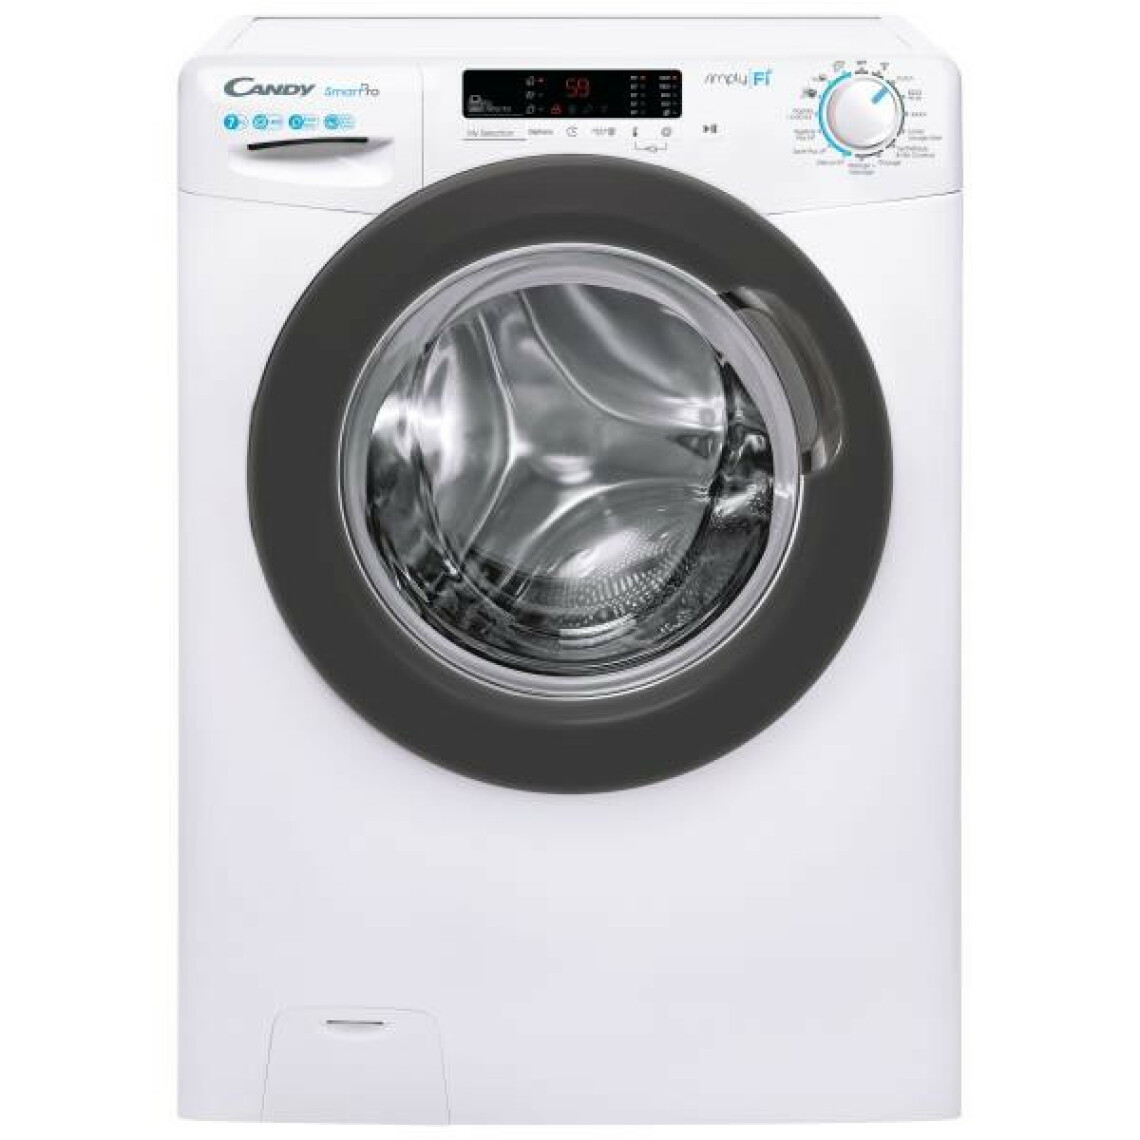 Candy - candy - cso1473dwre/1-47 - Lave-linge